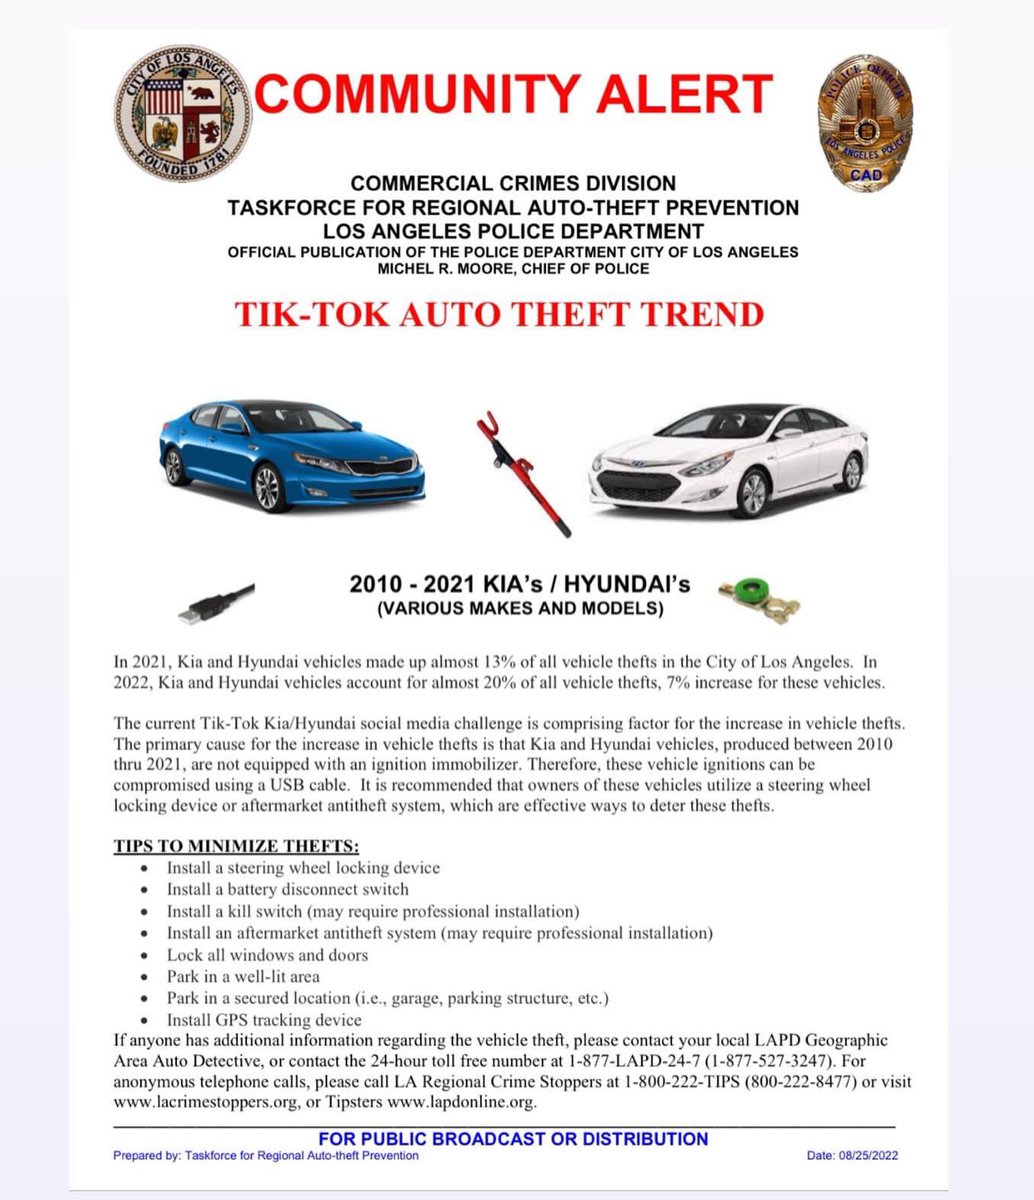 LAPD Topanga Div. on X: SAVE THE DATE : We hope to see you on Wednesday,  Aug 9th at California Pizza Kitchen at Topanga Mall for an amazing  Tip-A-Cop hosted by LAPD